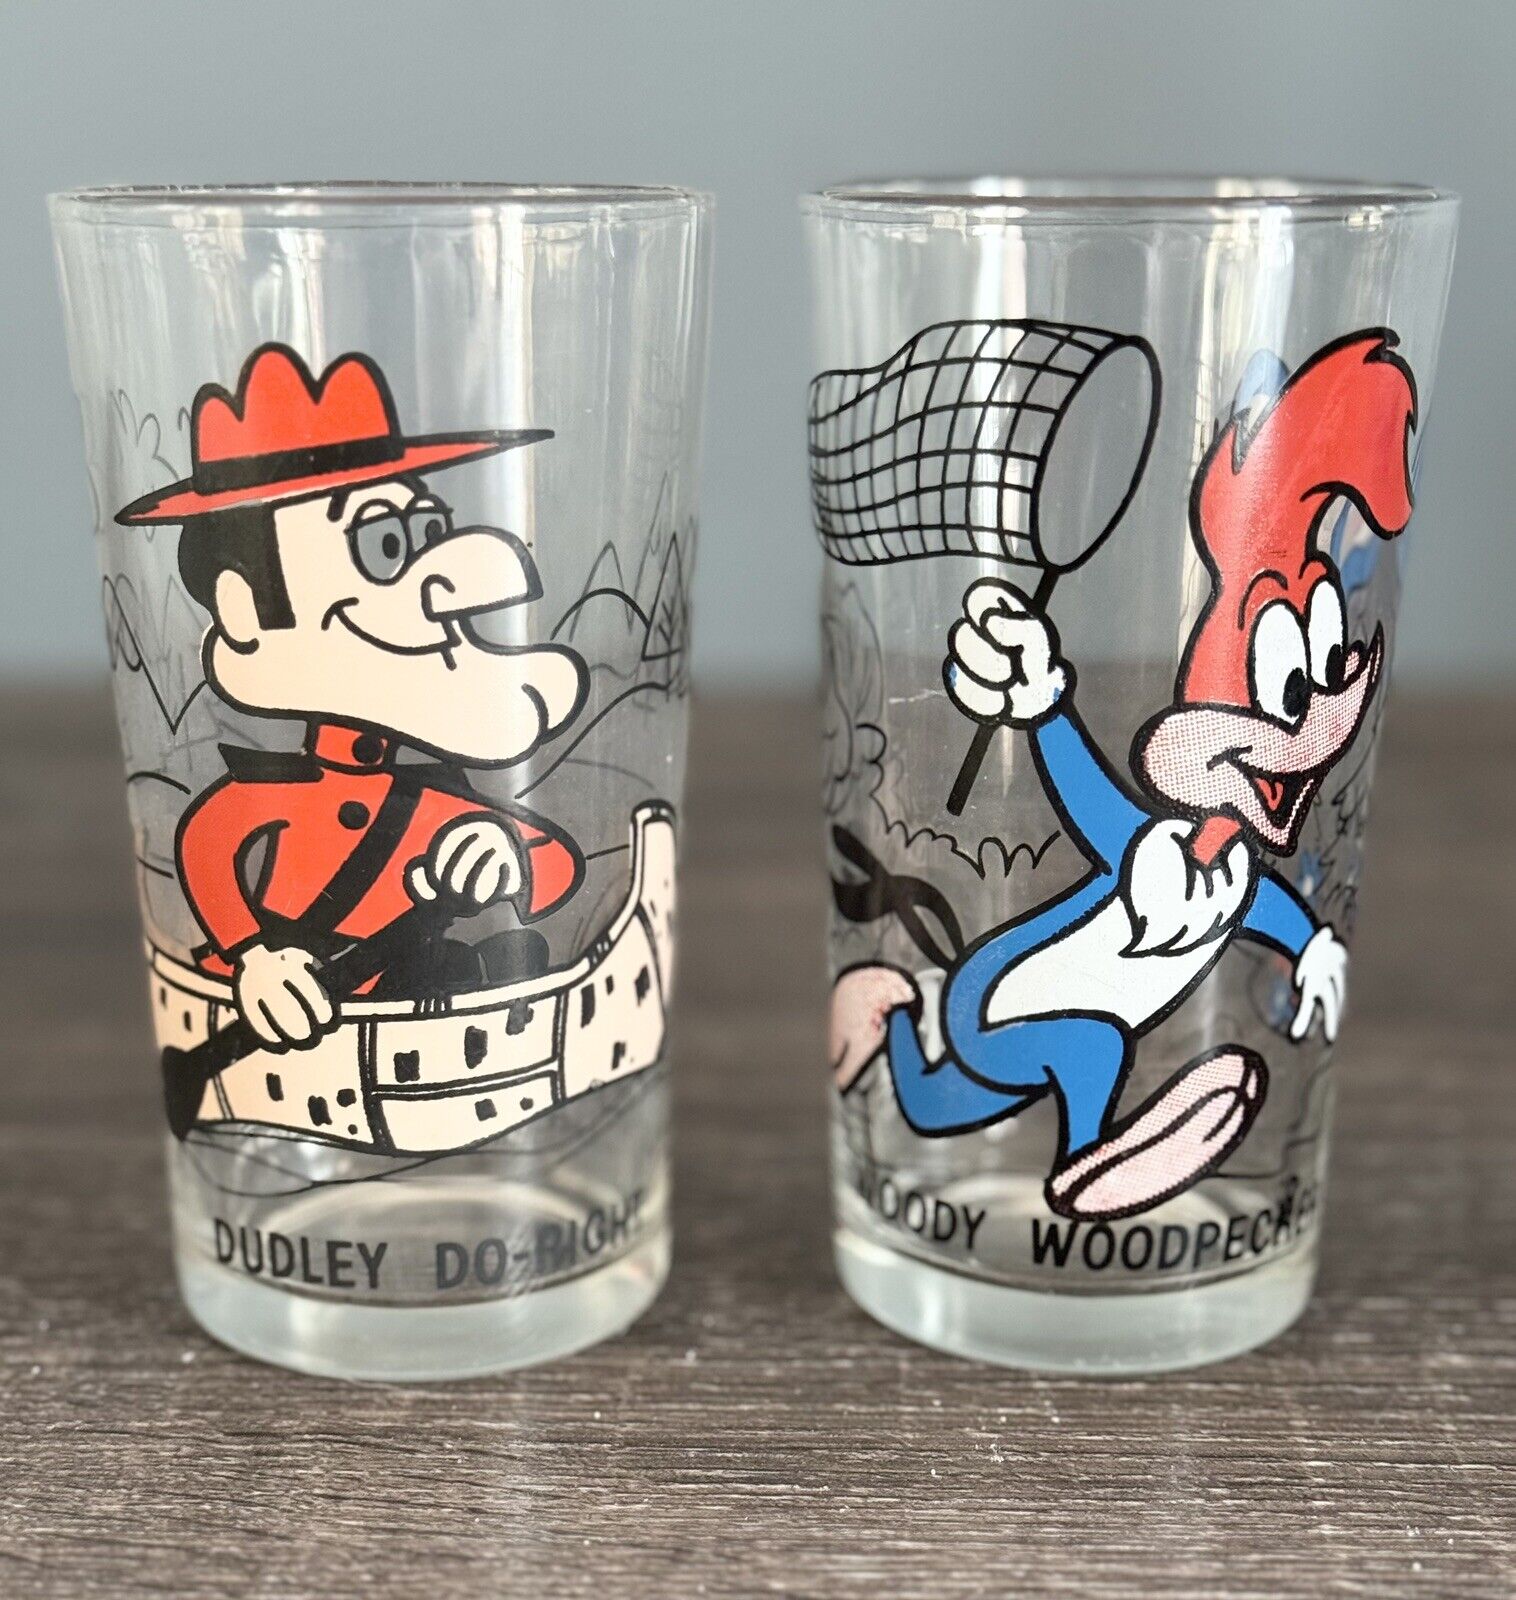 Vintage 1970s Pepsi Collector Series Glasses WOODY WOODPECKER & DUDLEY DO-RIGHT